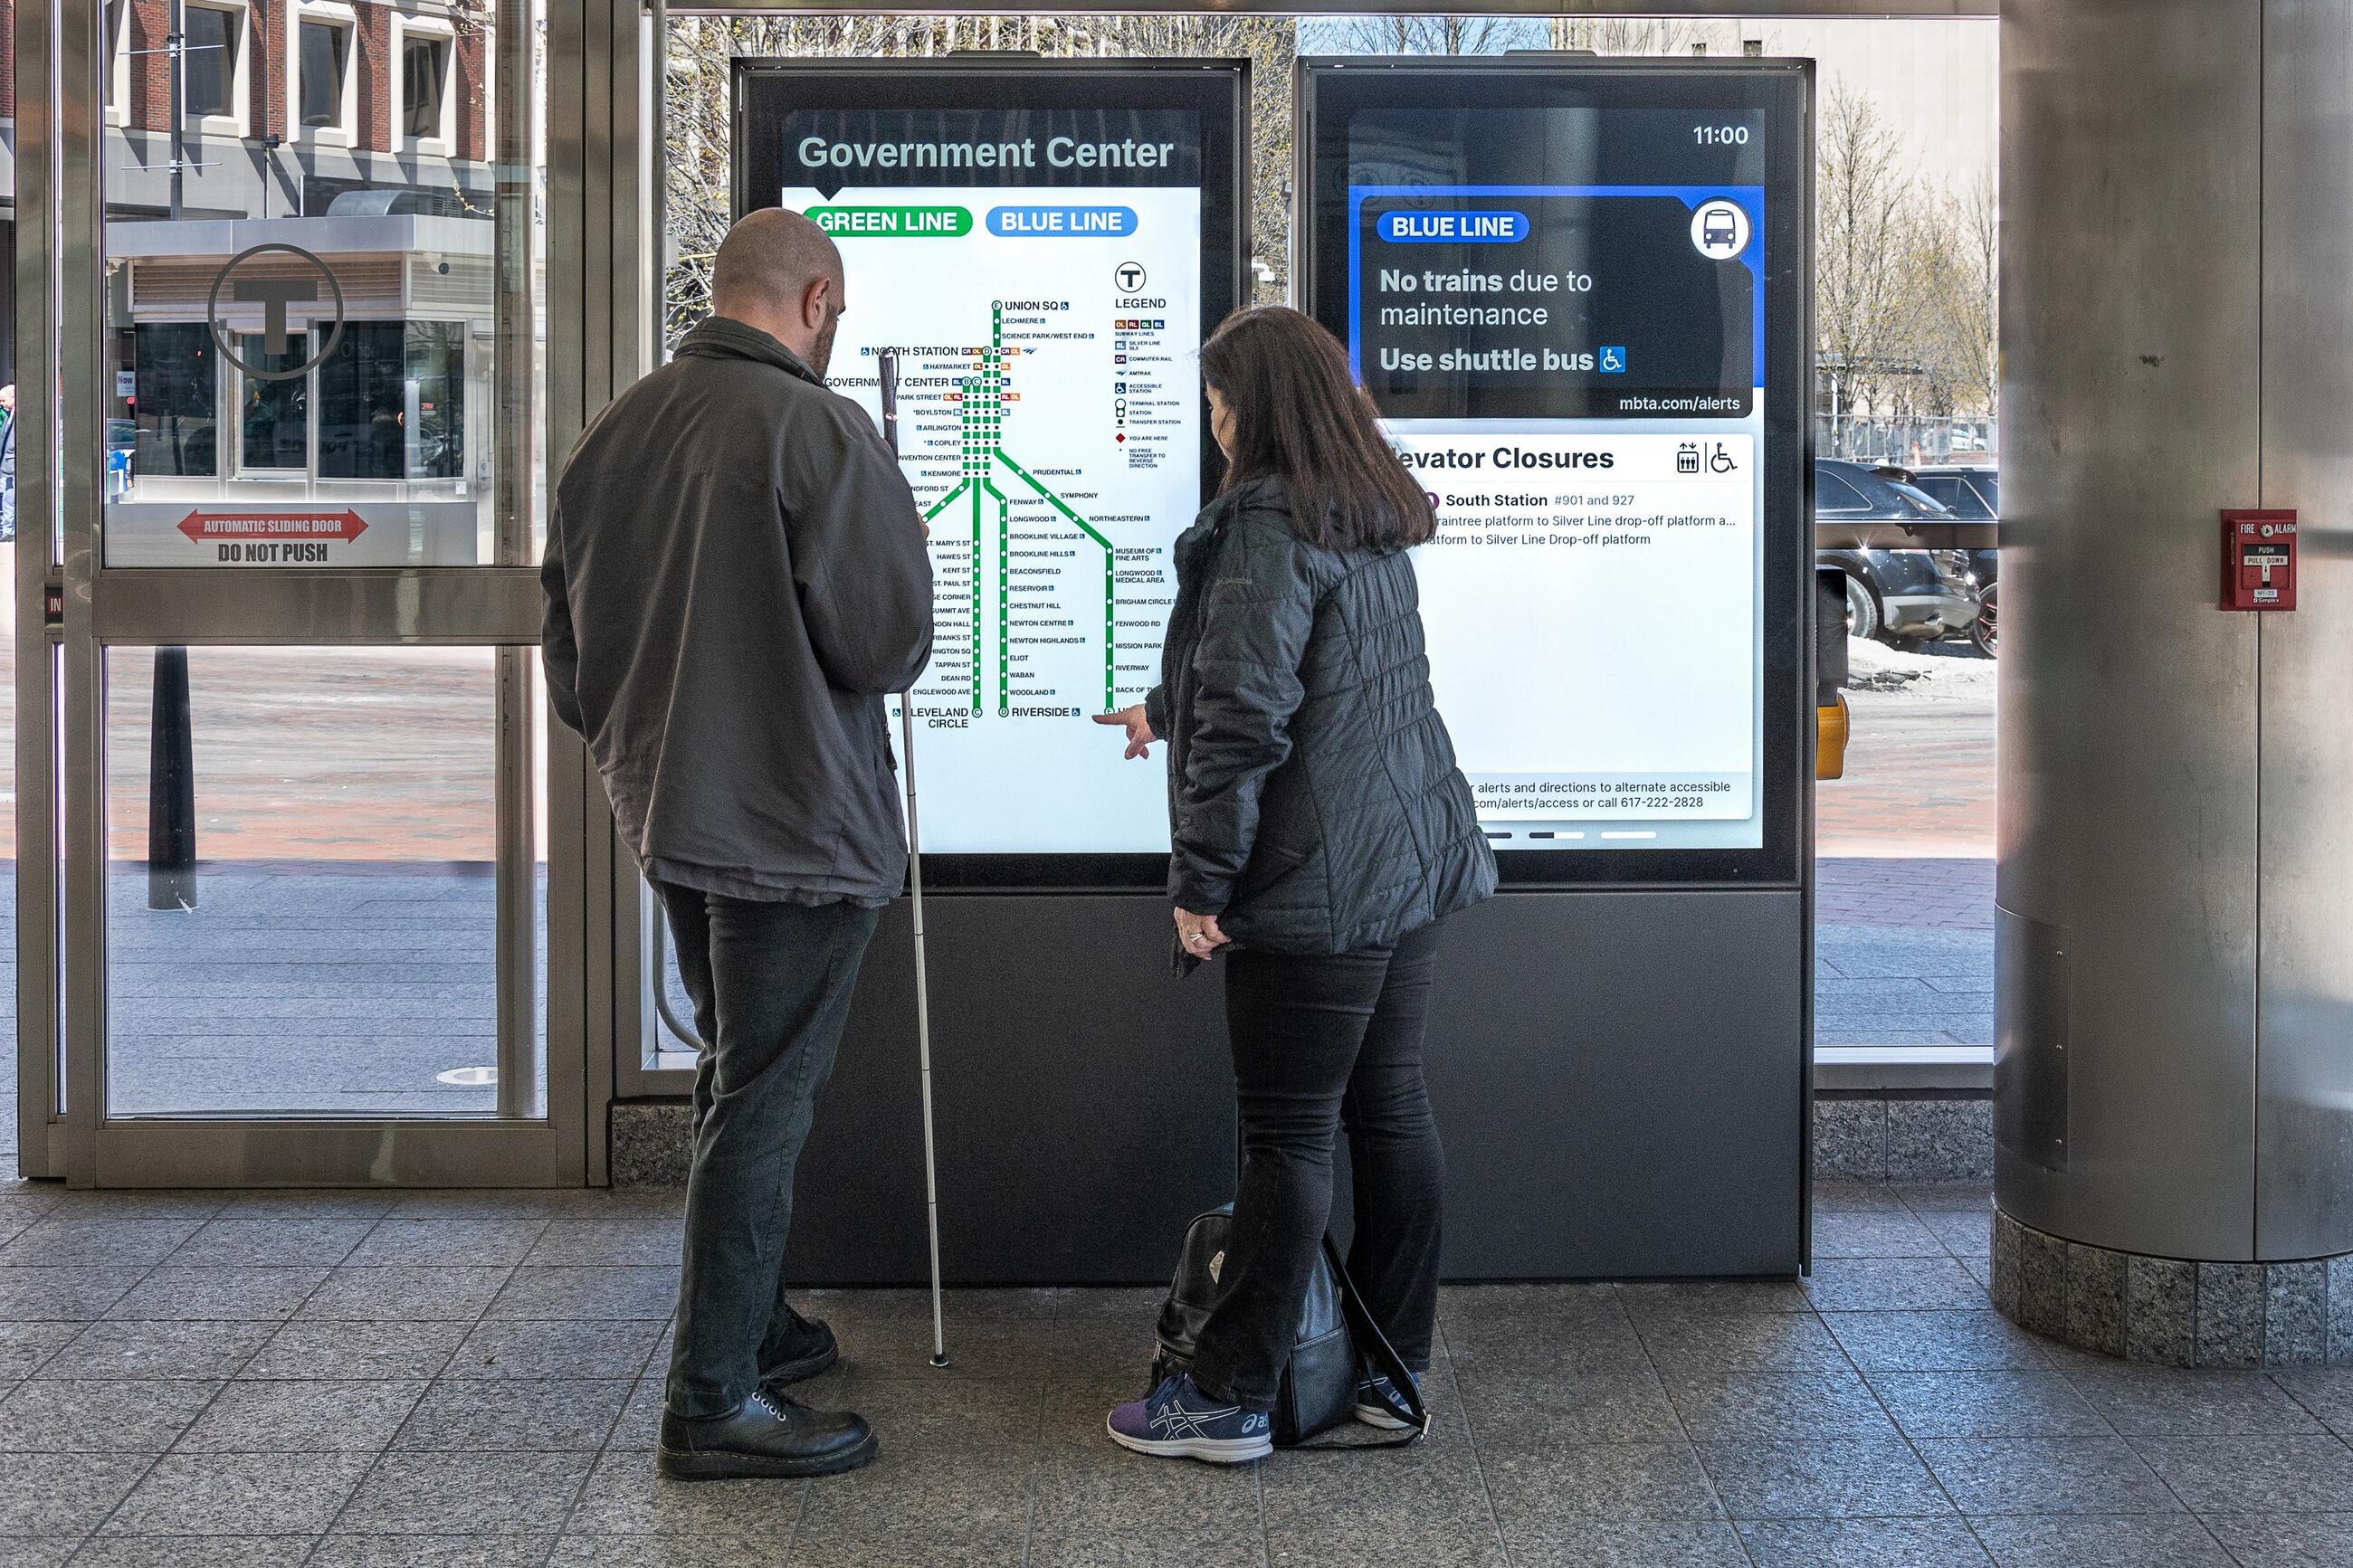 Accessibility improvements include in-station digital screens